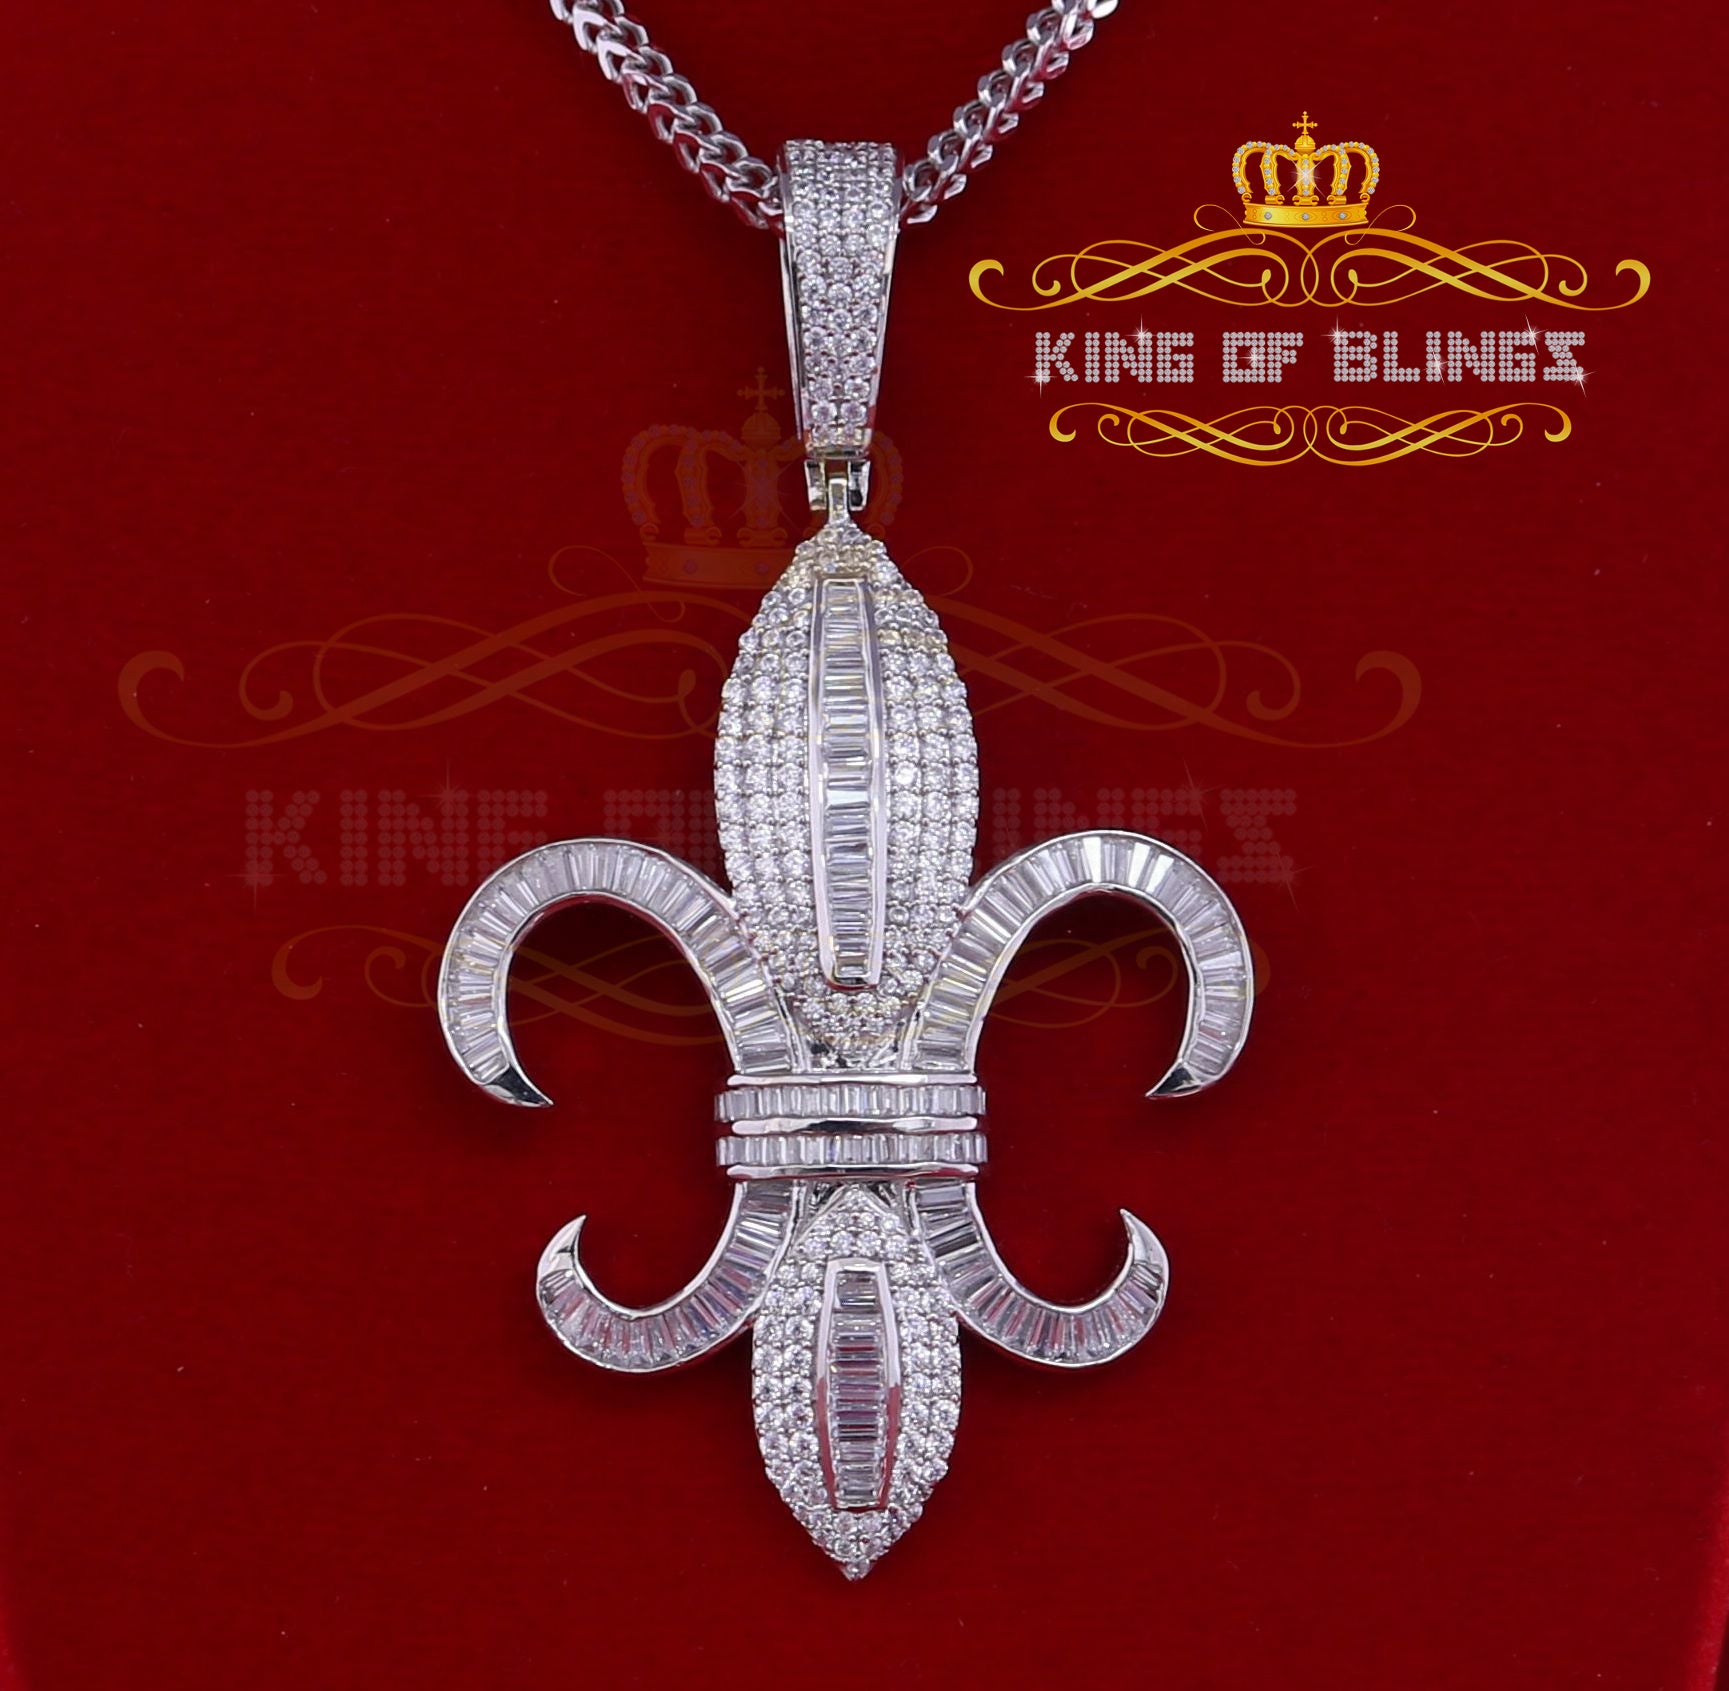 King Of Bling's White Sterling Silver Fleur de Lis wise Shape Pendant with15.62ct Cubic Zirconia KING OF BLINGS